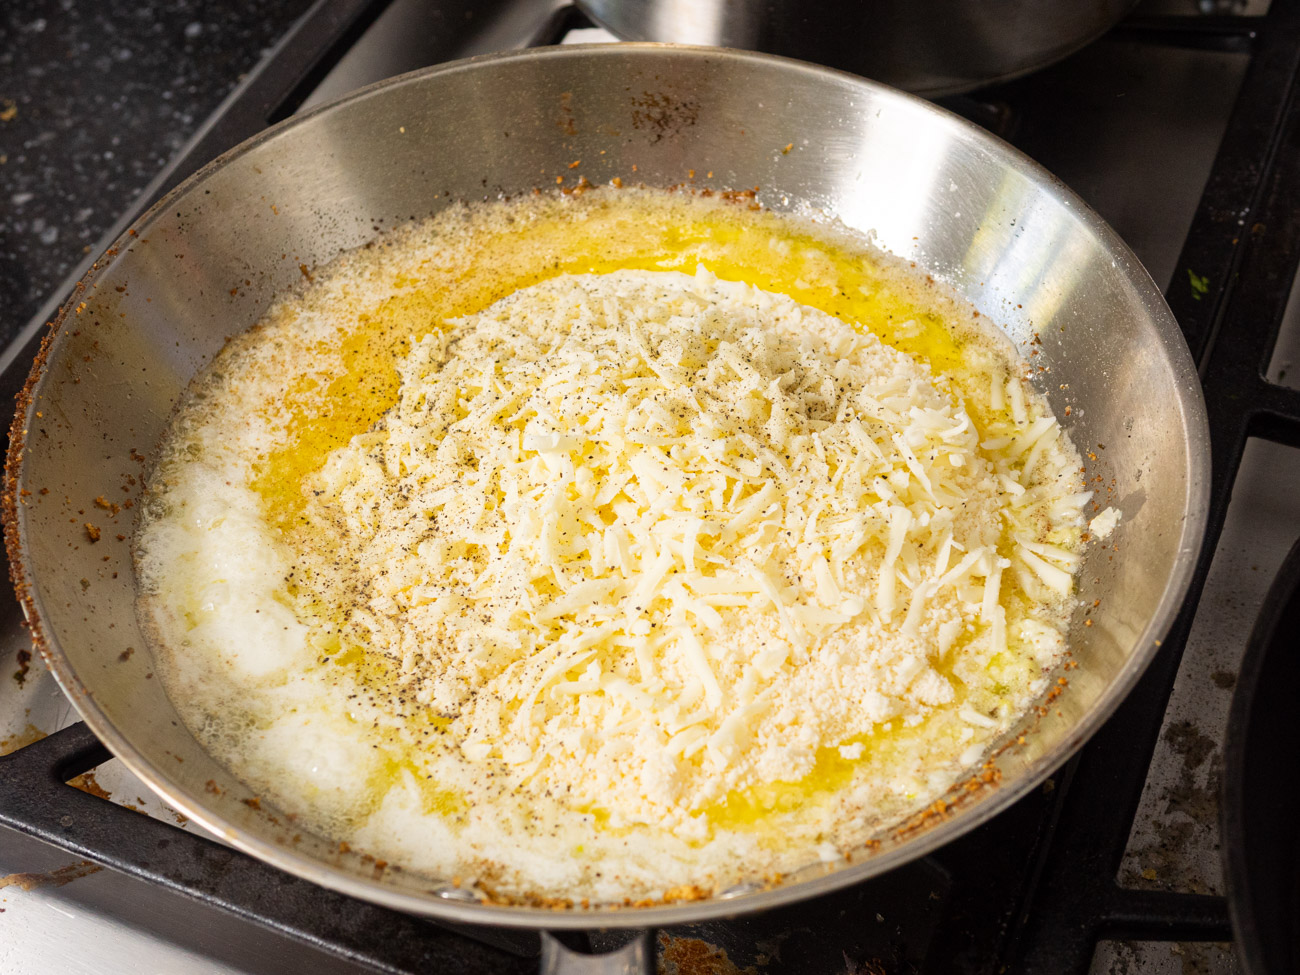 In the same skillet, melt the 6 tablespoons of butter. Add garlic and cook 1 minute. Stir in whipping cream, Parmesan, and mozzarella. Season to taste with salt and pepper and stir until sauce is smooth.